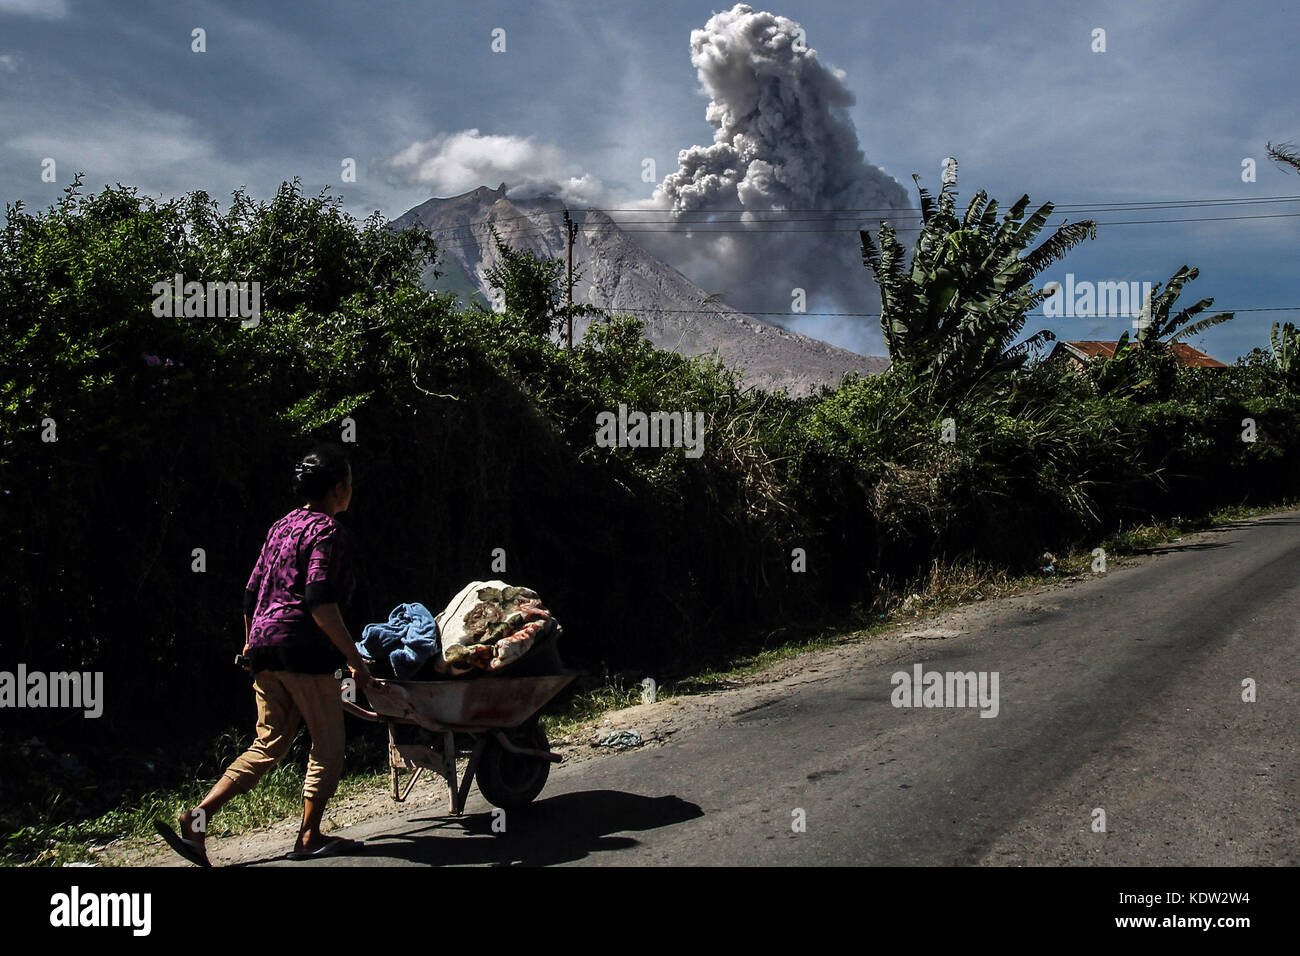 Karo, North Sumatra, Indonesia. 16th Oct, 2017. The villagers of Tiga Pancur walk near Mount Sinabung, after the huge volcano in Indonesia erupted on Sunday, spewing hot ash into the air. Thousands were evacuated after Mount Sinabung started erupting and spewing ash half a kilometre into the air. The volcano began erupting in 2010 after lying dormant for four centuries. A large eruption in May 2016 killed seven people. Credit: Ivan Damanik/ZUMA Wire/Alamy Live News Stock Photo